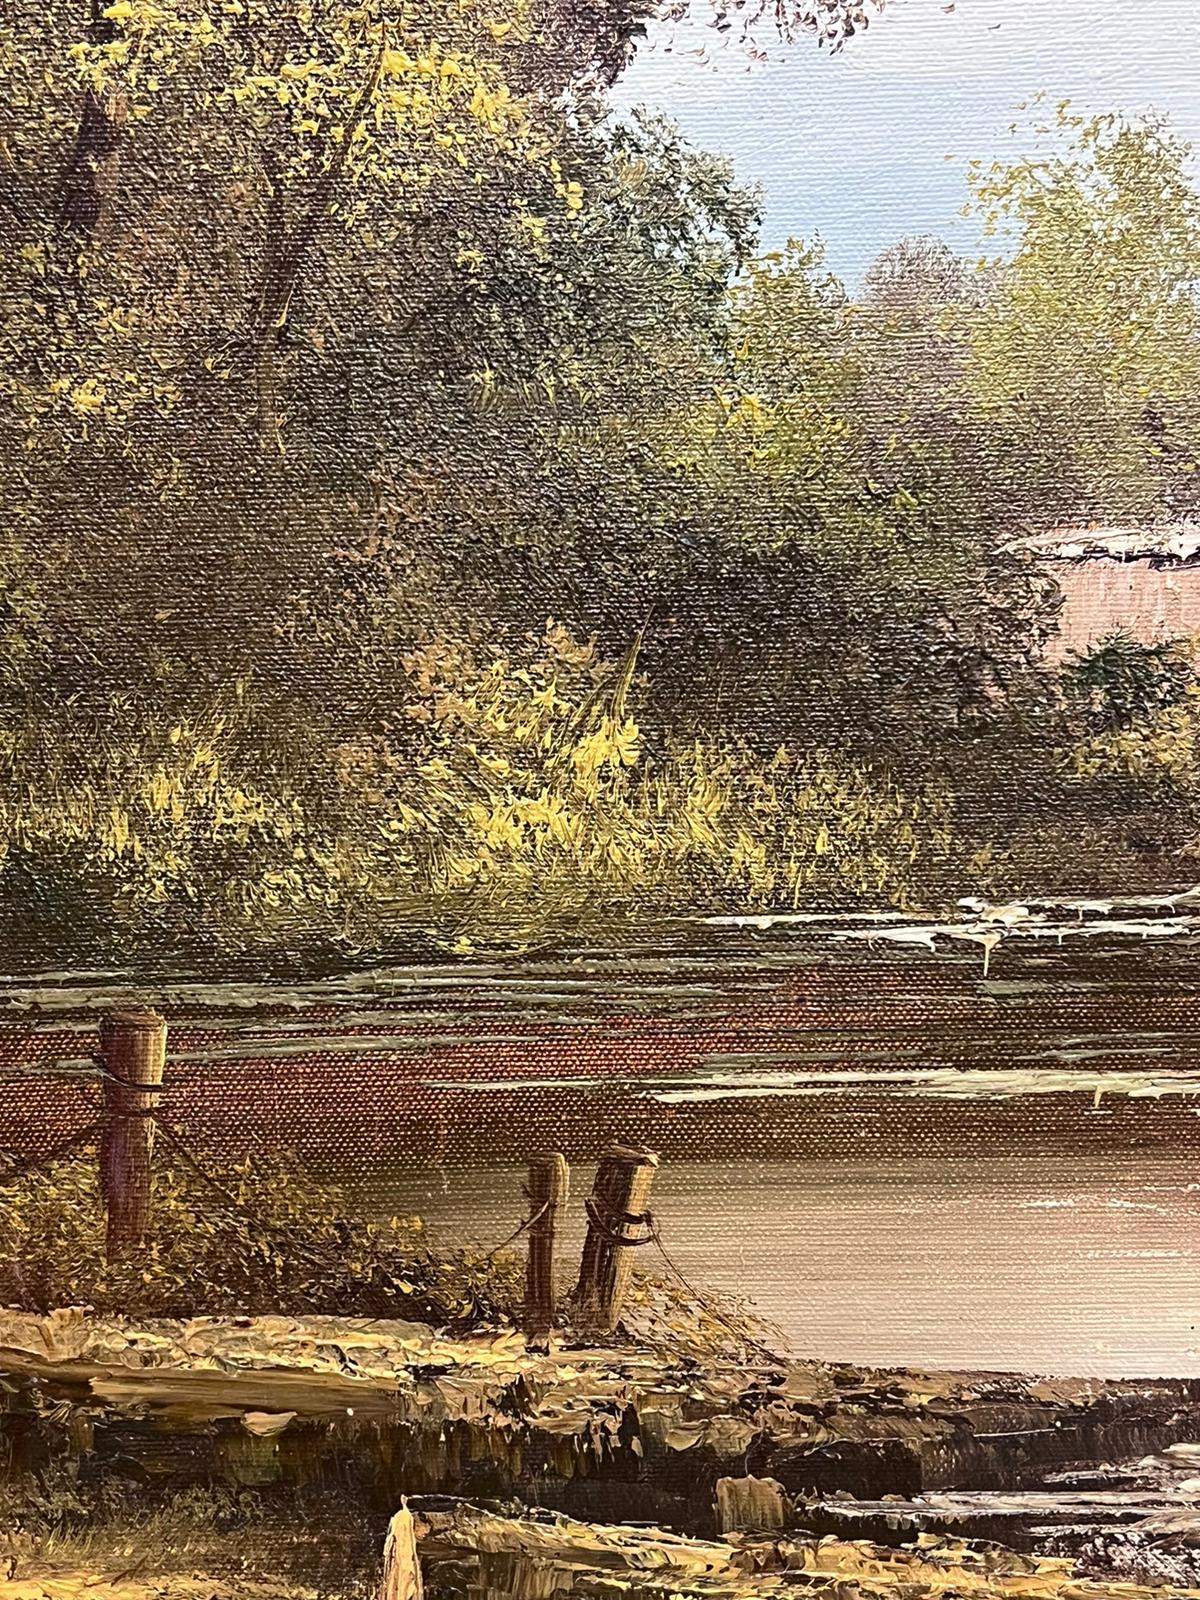 Tranquil Rural English River Landscape signed oil painting on canvas - Brown Landscape Painting by English artist